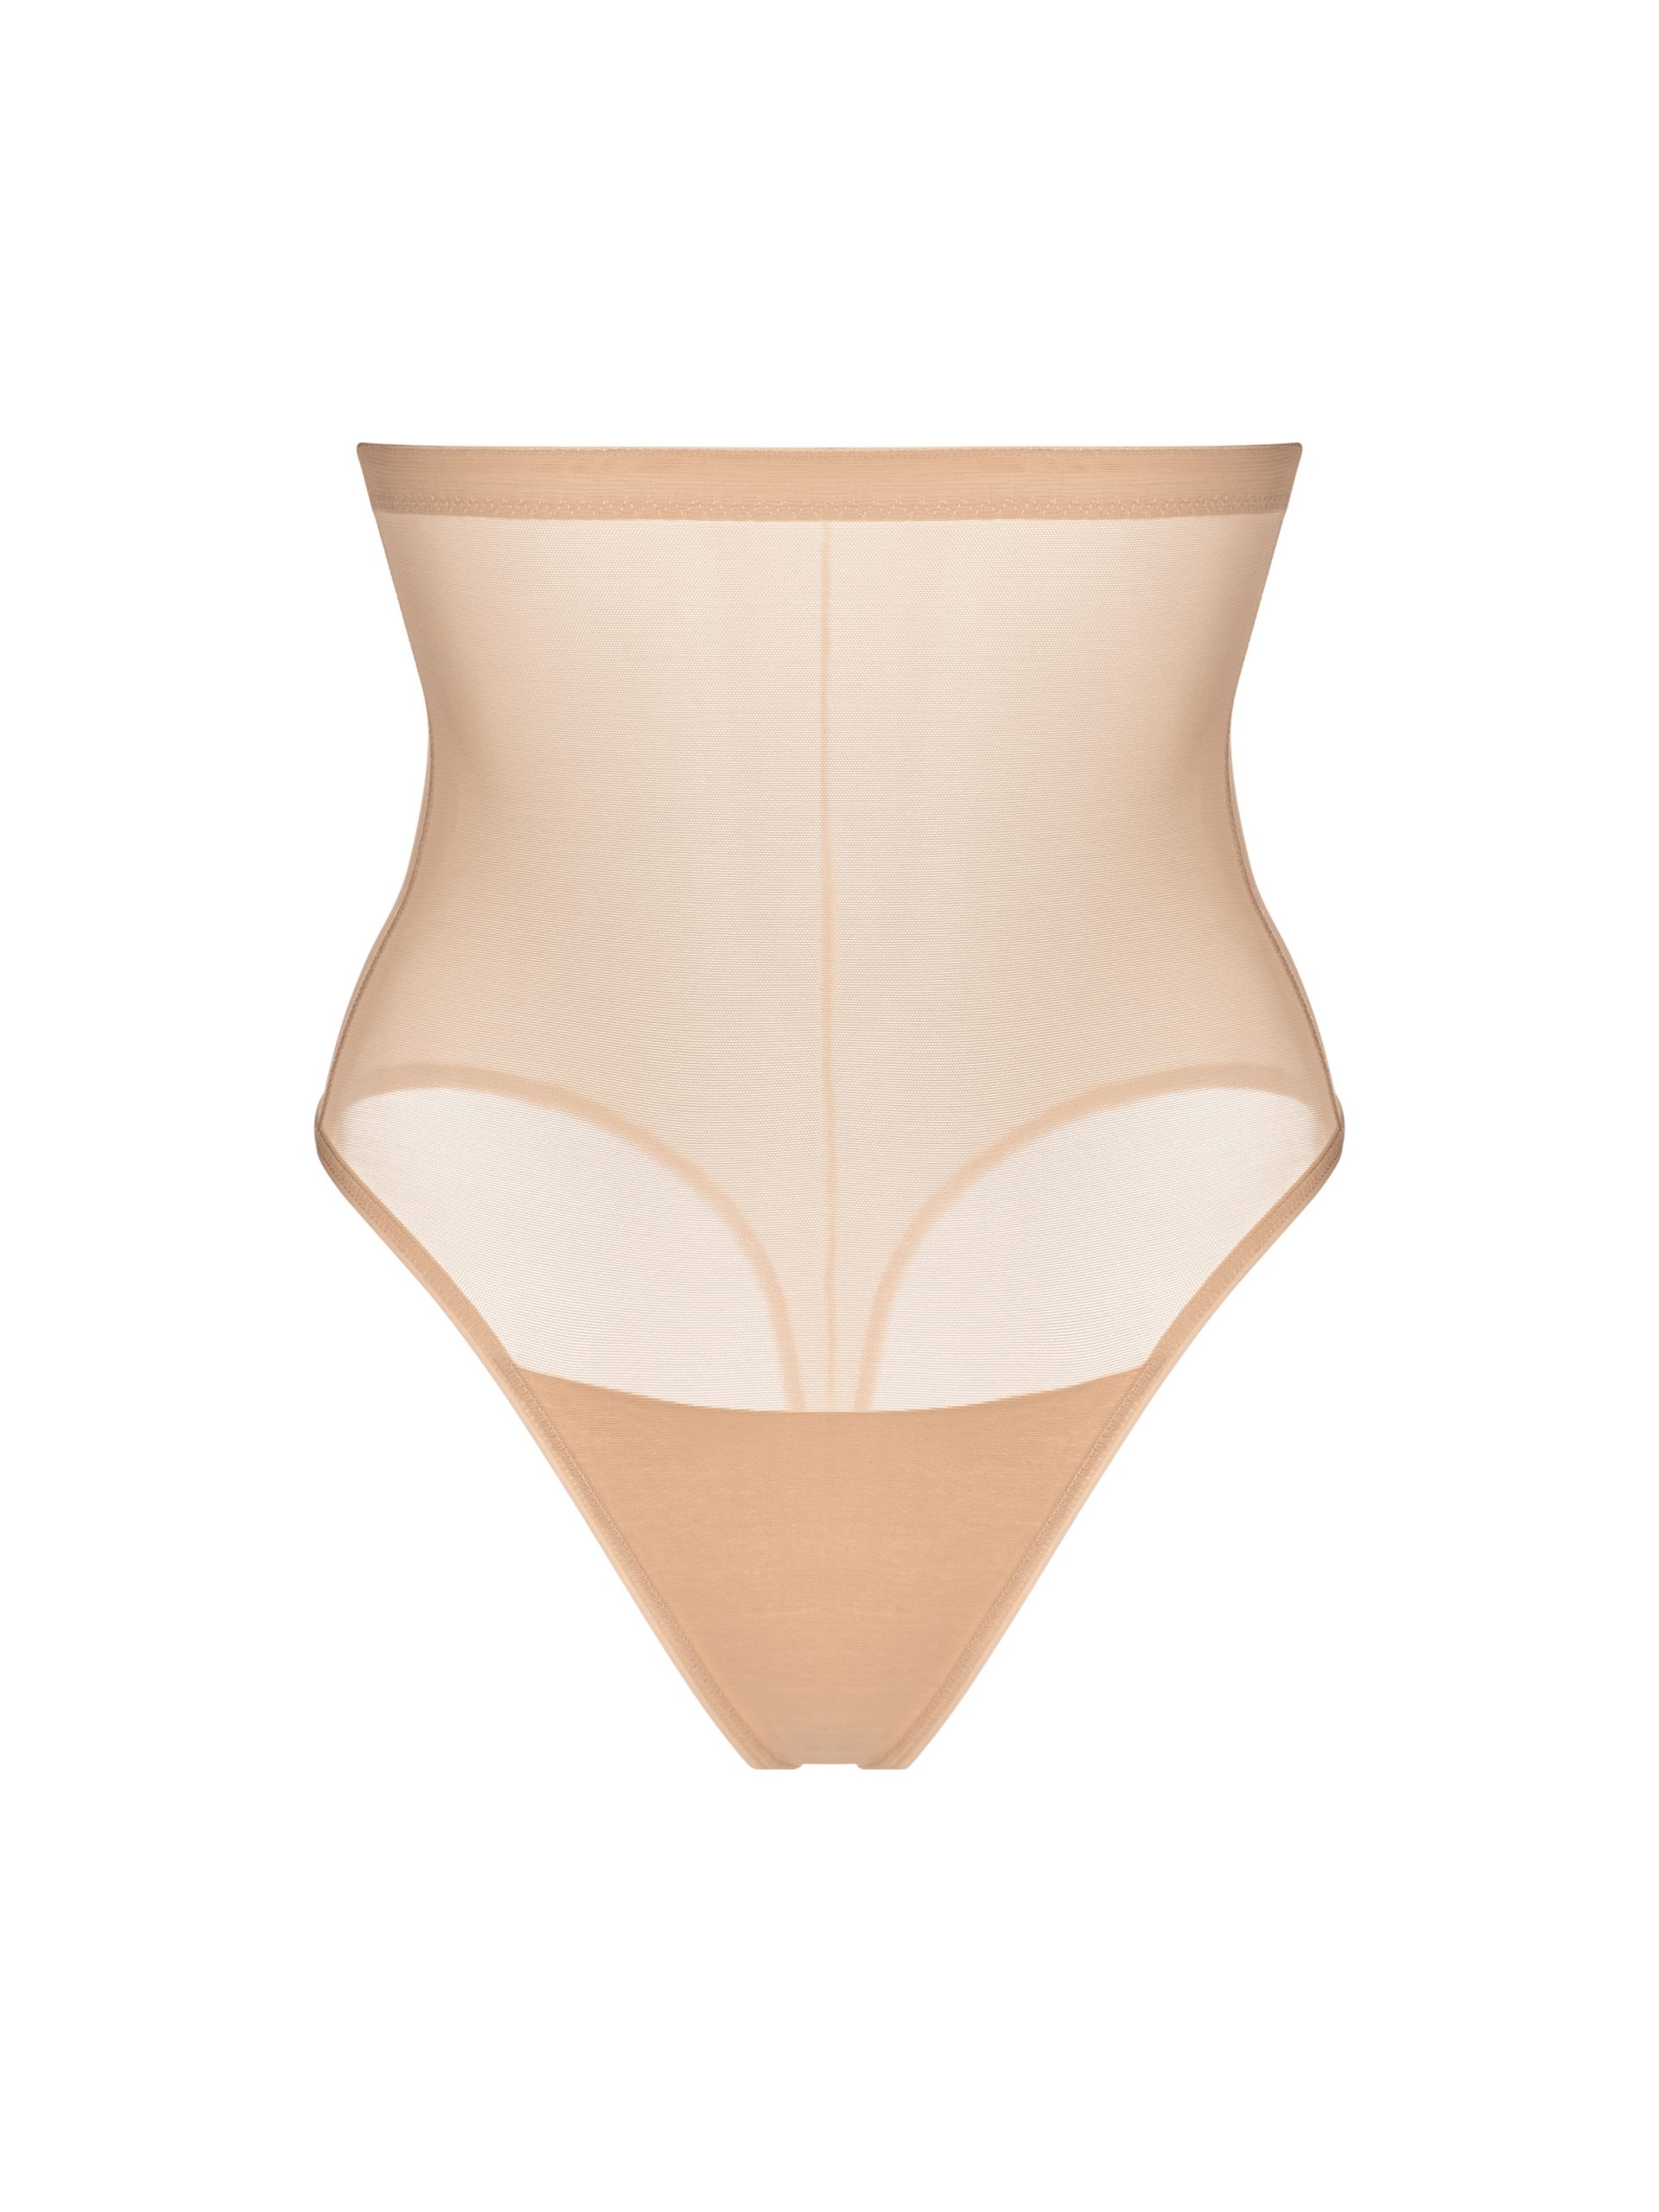 Dorina Skin Sculpt poly blend shaping briefs with mesh inserts in